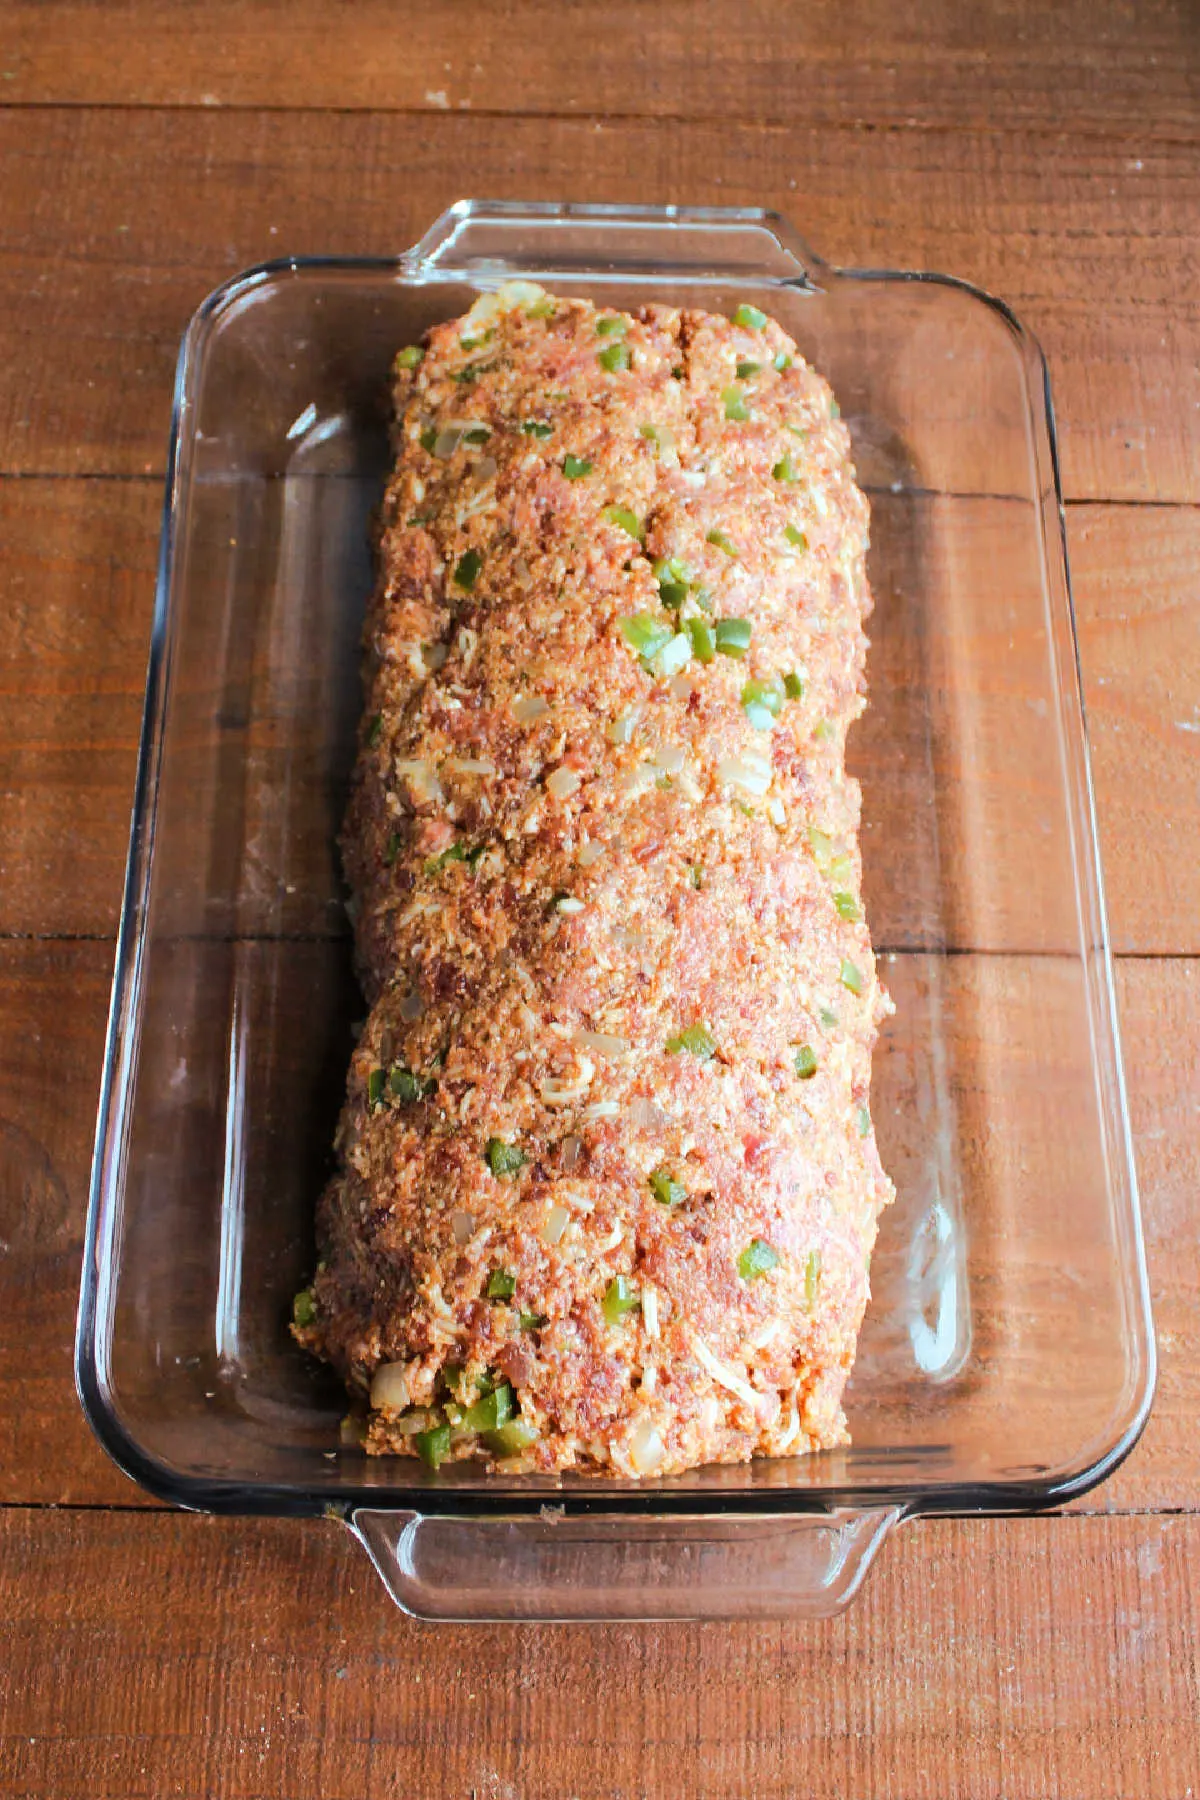 Formed meatloaf made from beef, sausage, peppers, onions and more made into a loaf in a 9x13-inch pan.